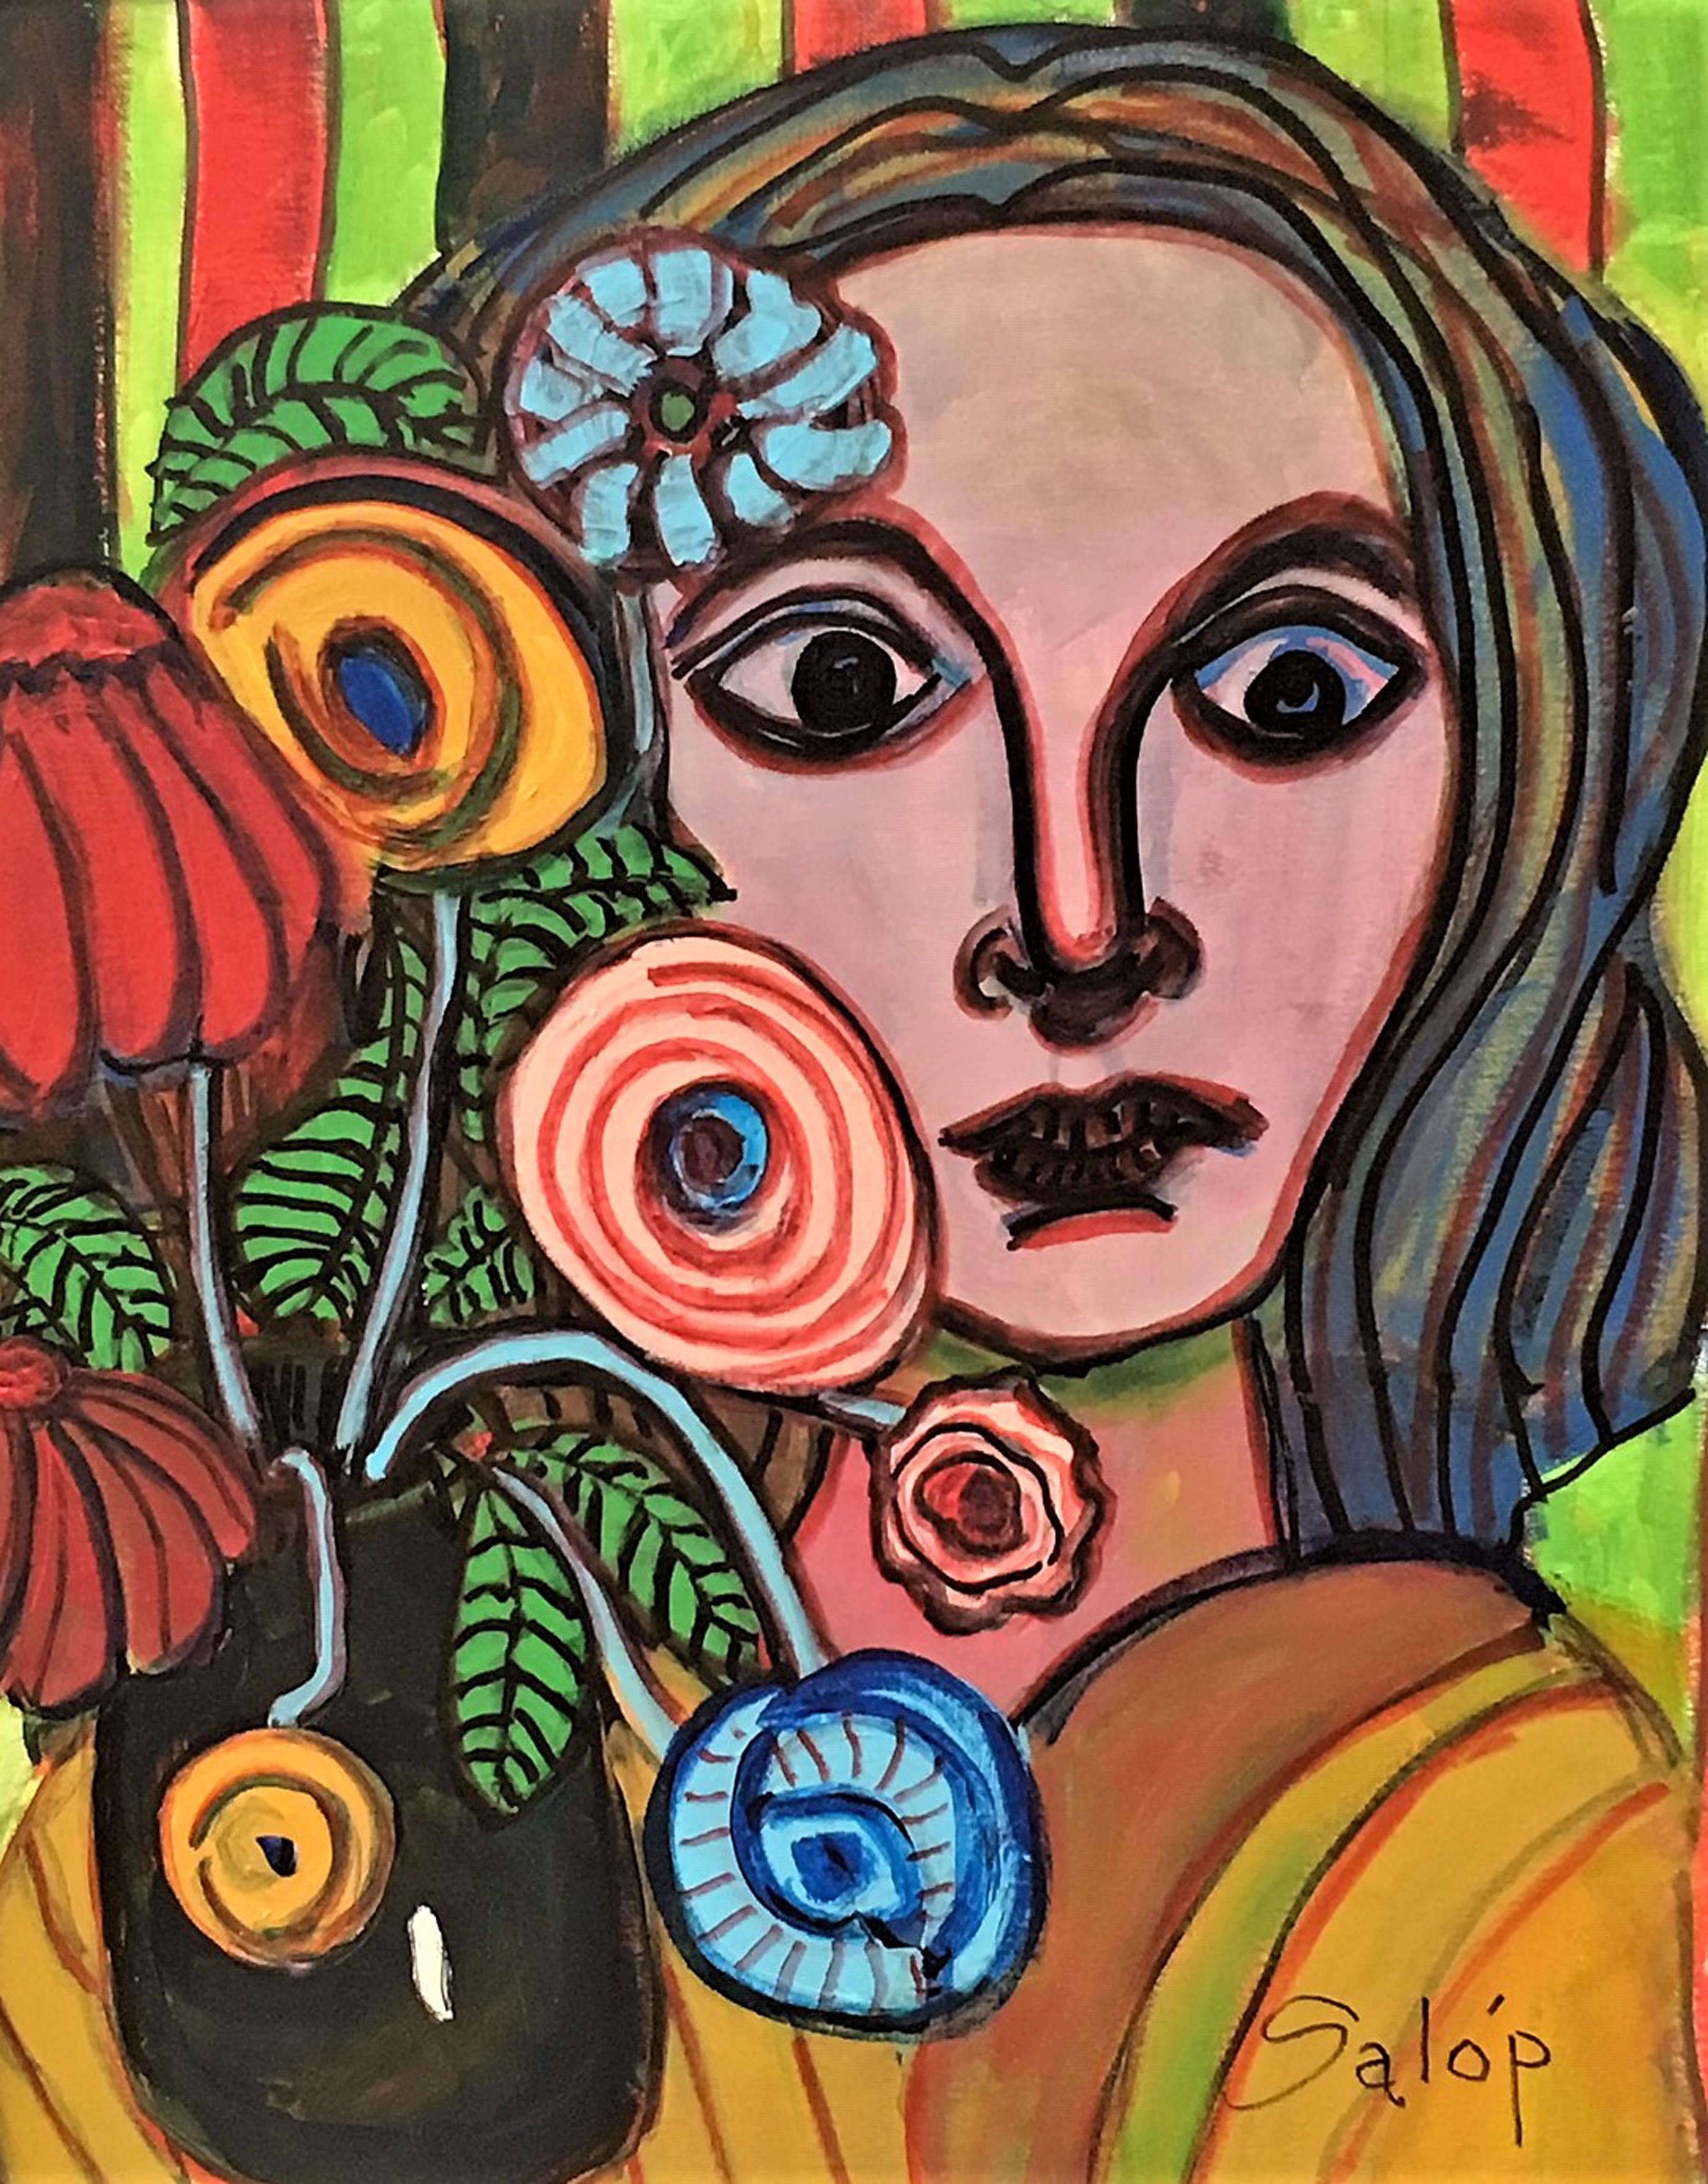 Salop'- Ed Ryman Figurative Painting - Woman in Love With Flowers